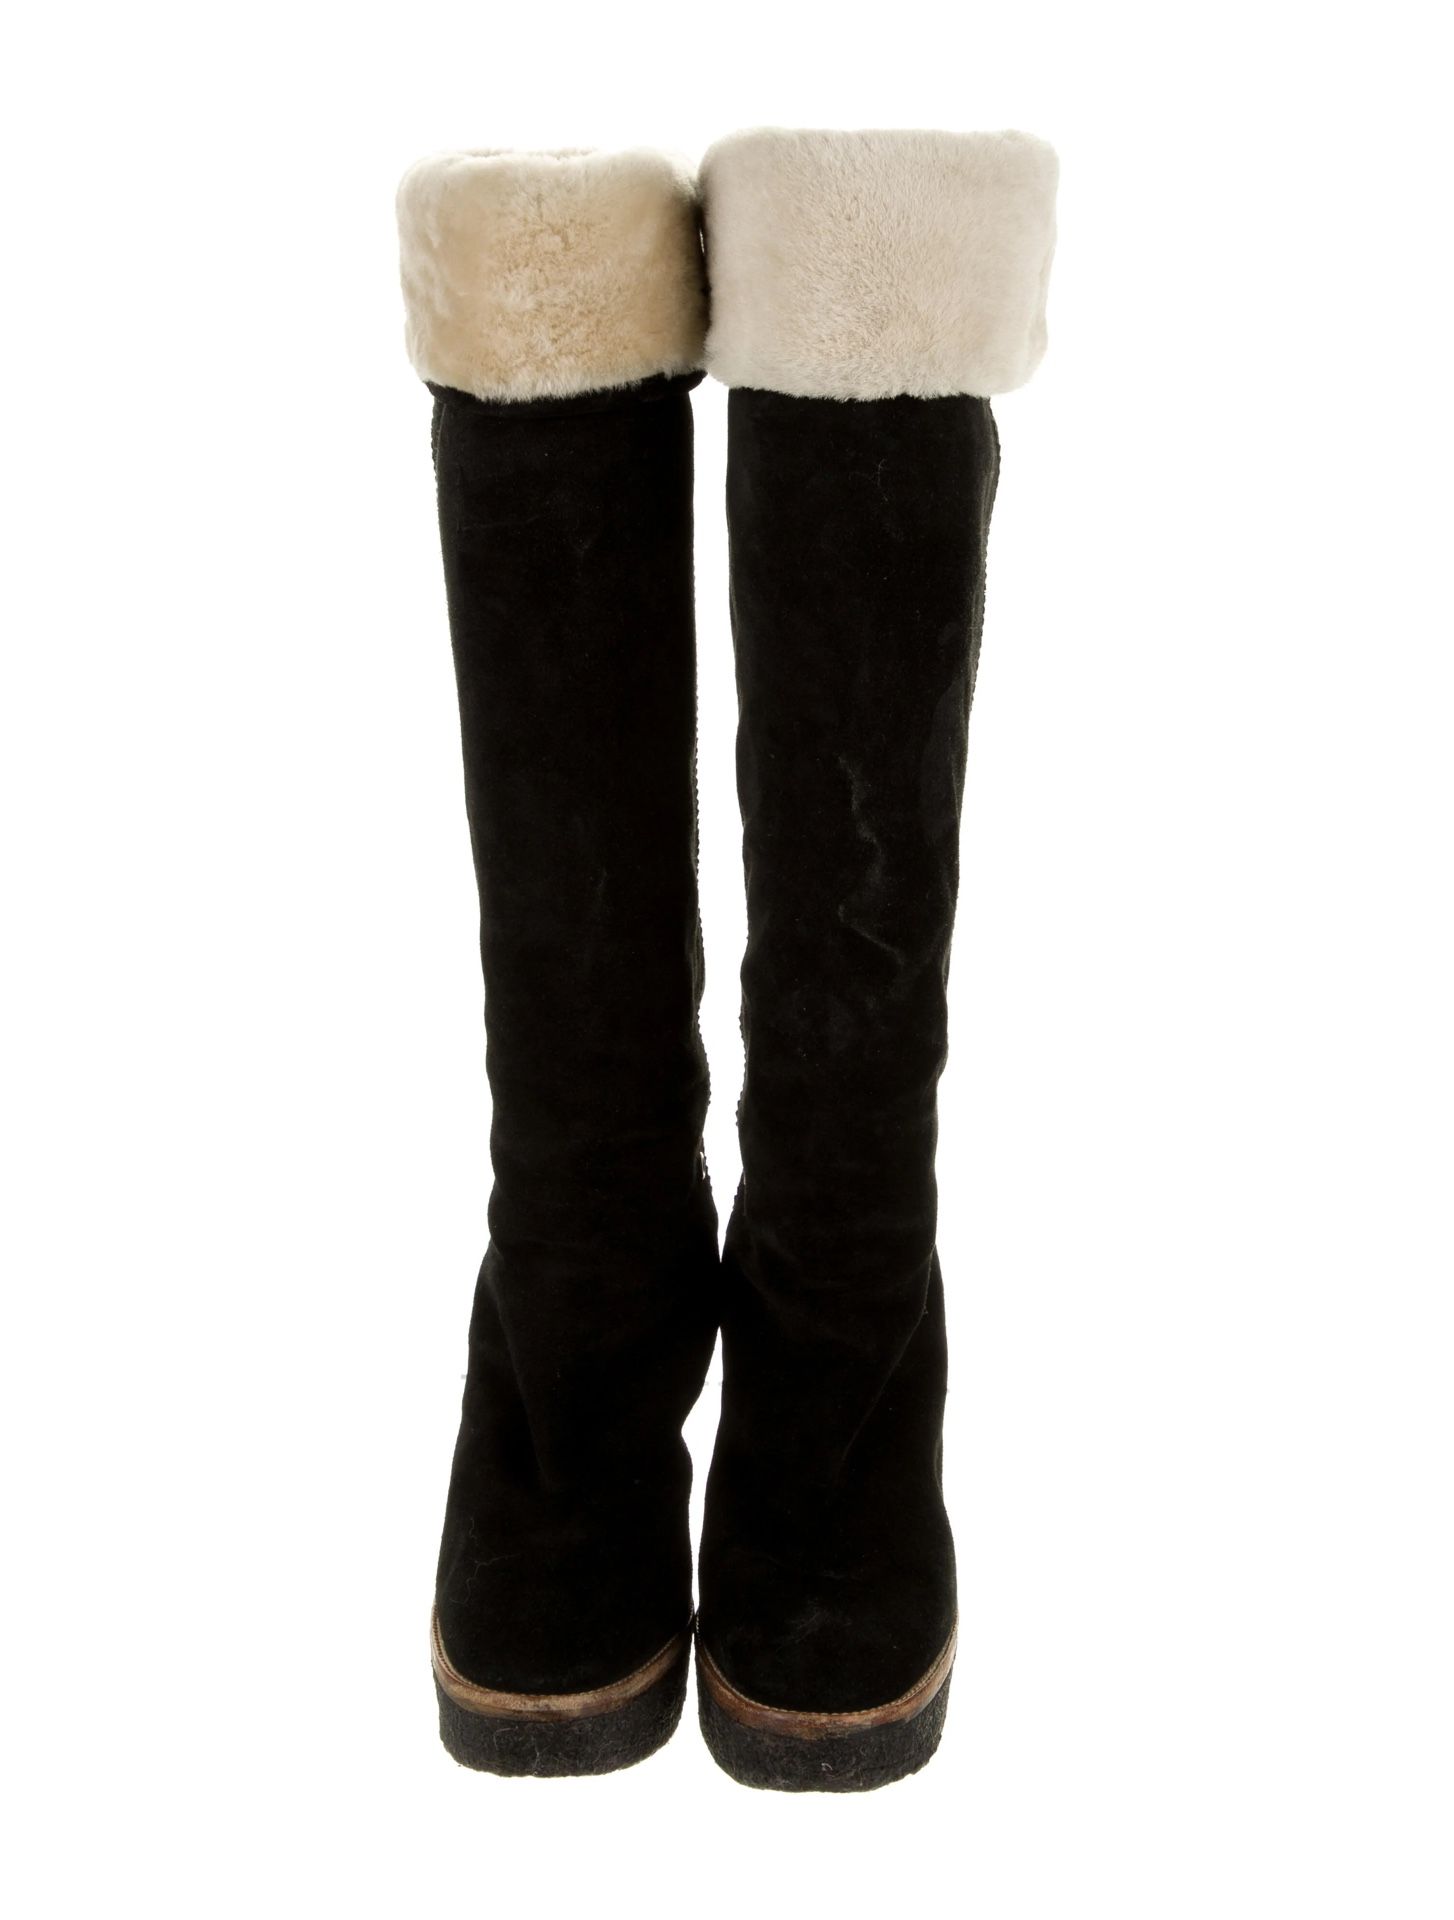 YSL Yves Saint Laurent Suede Shearling Fur Wedge Boots